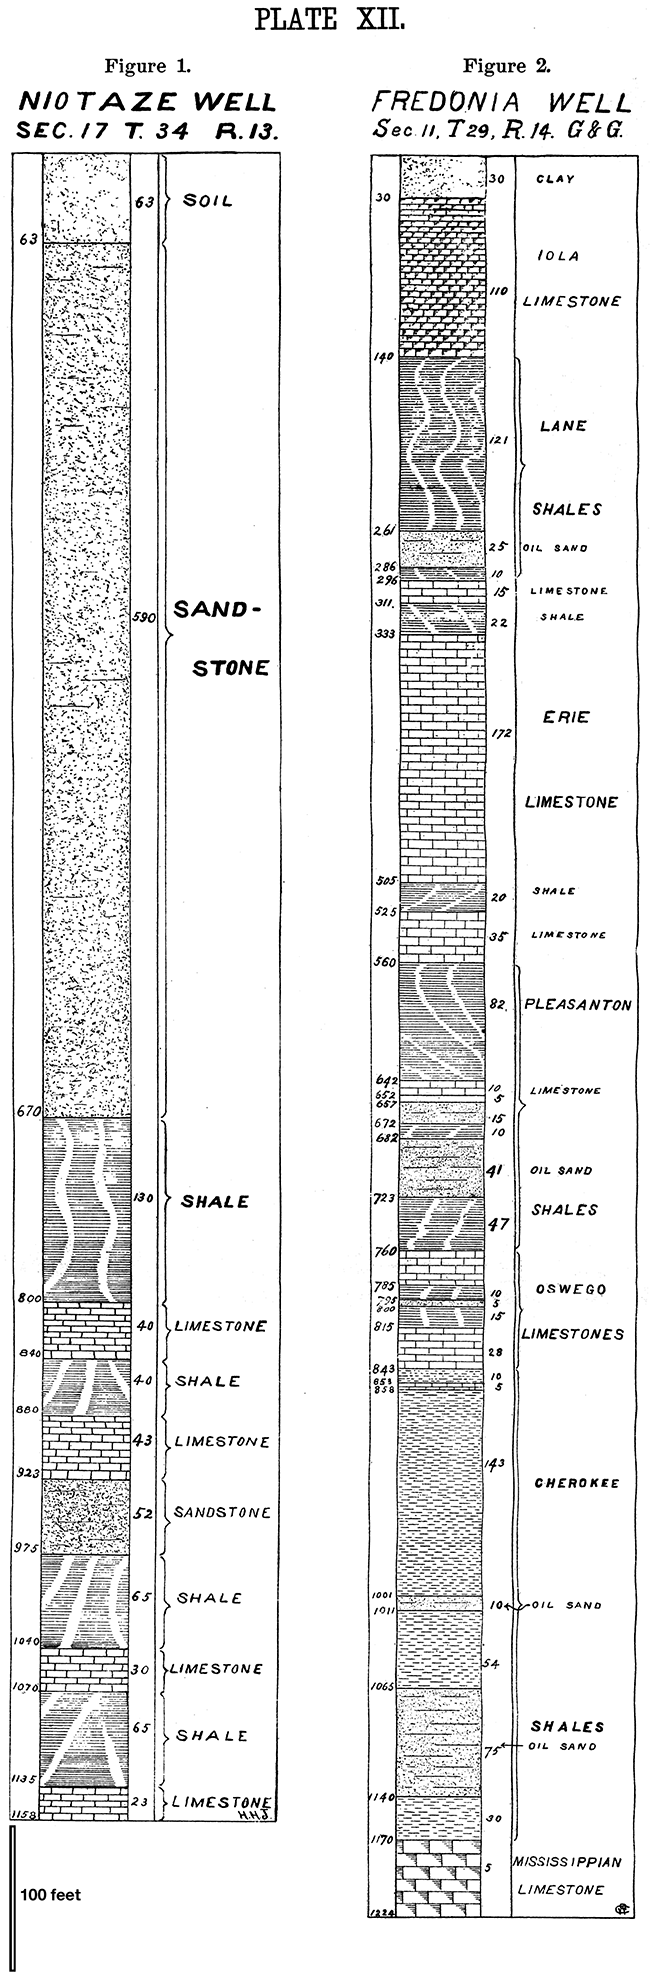 Two stratigraphic columns from the Niotaze and Fredonia wells.